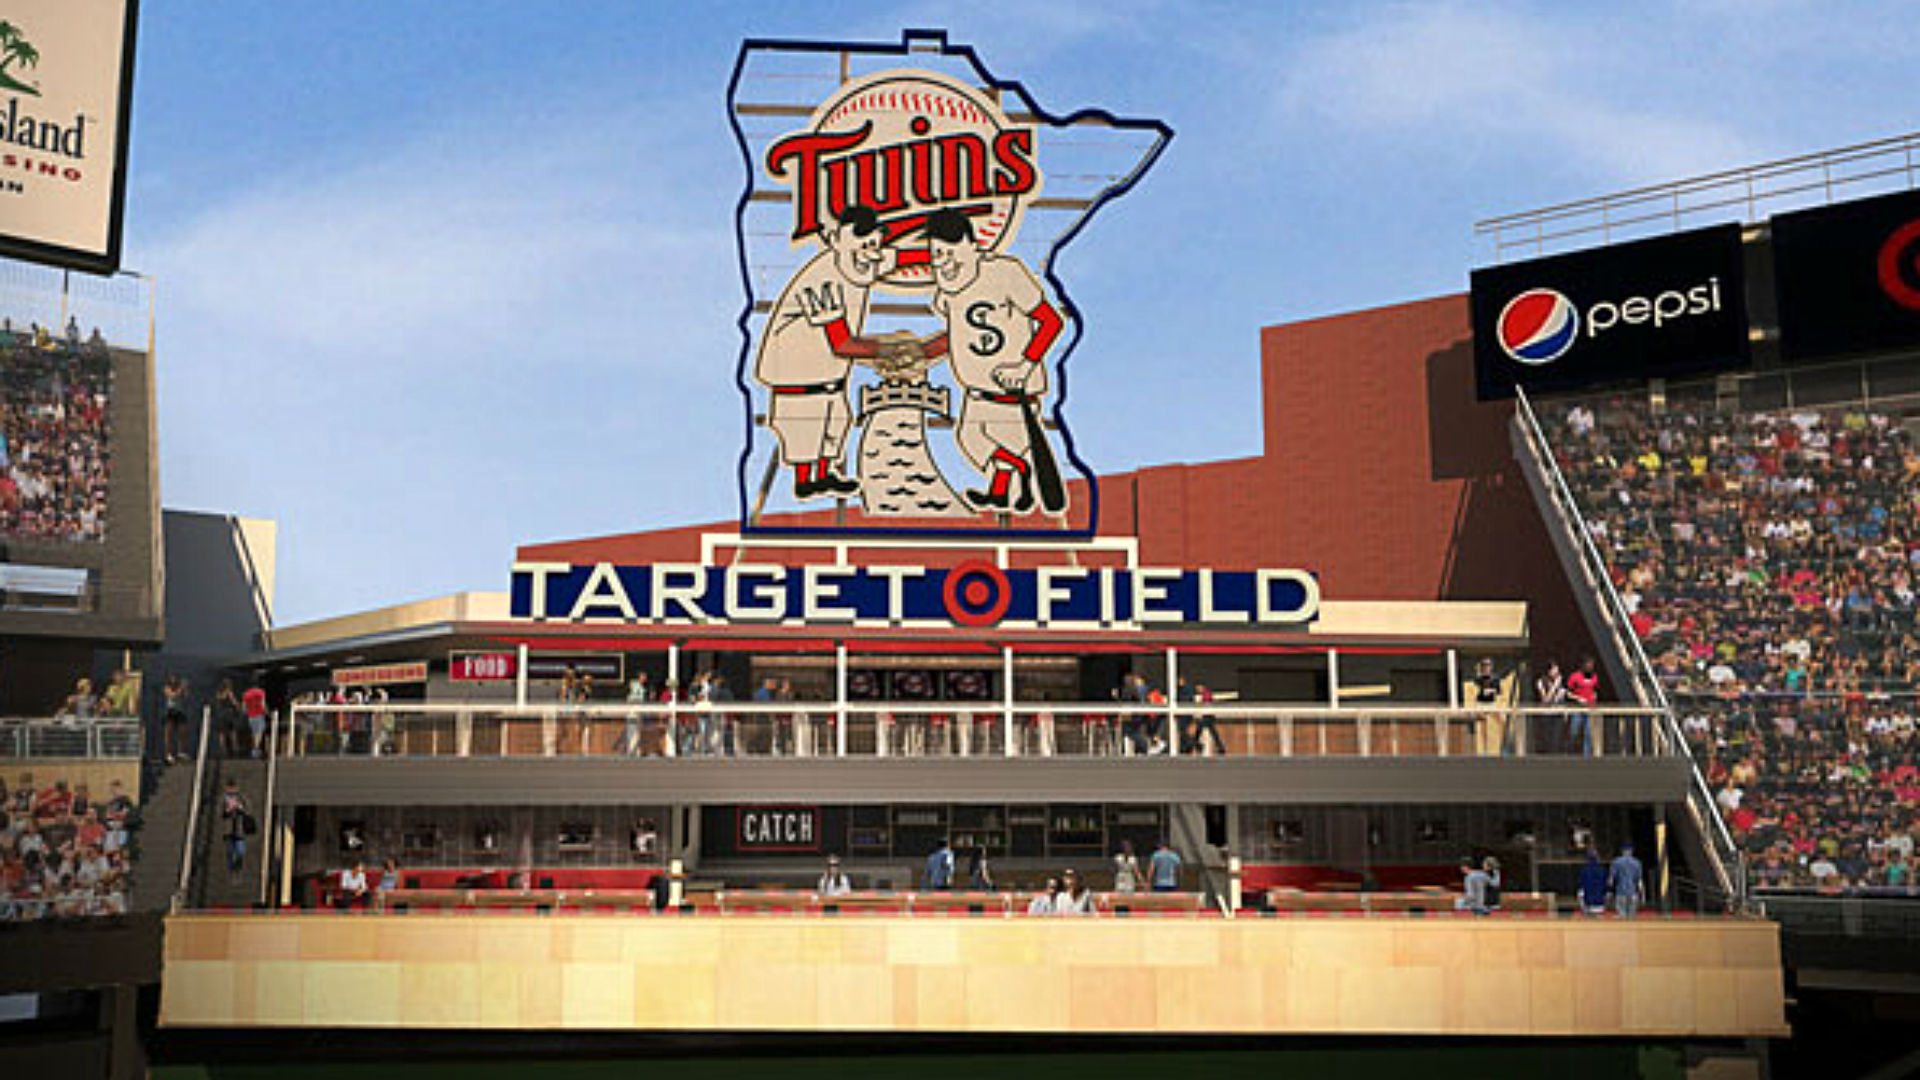 Twins name stadium bar after kirby pucketts world series catch sporting news